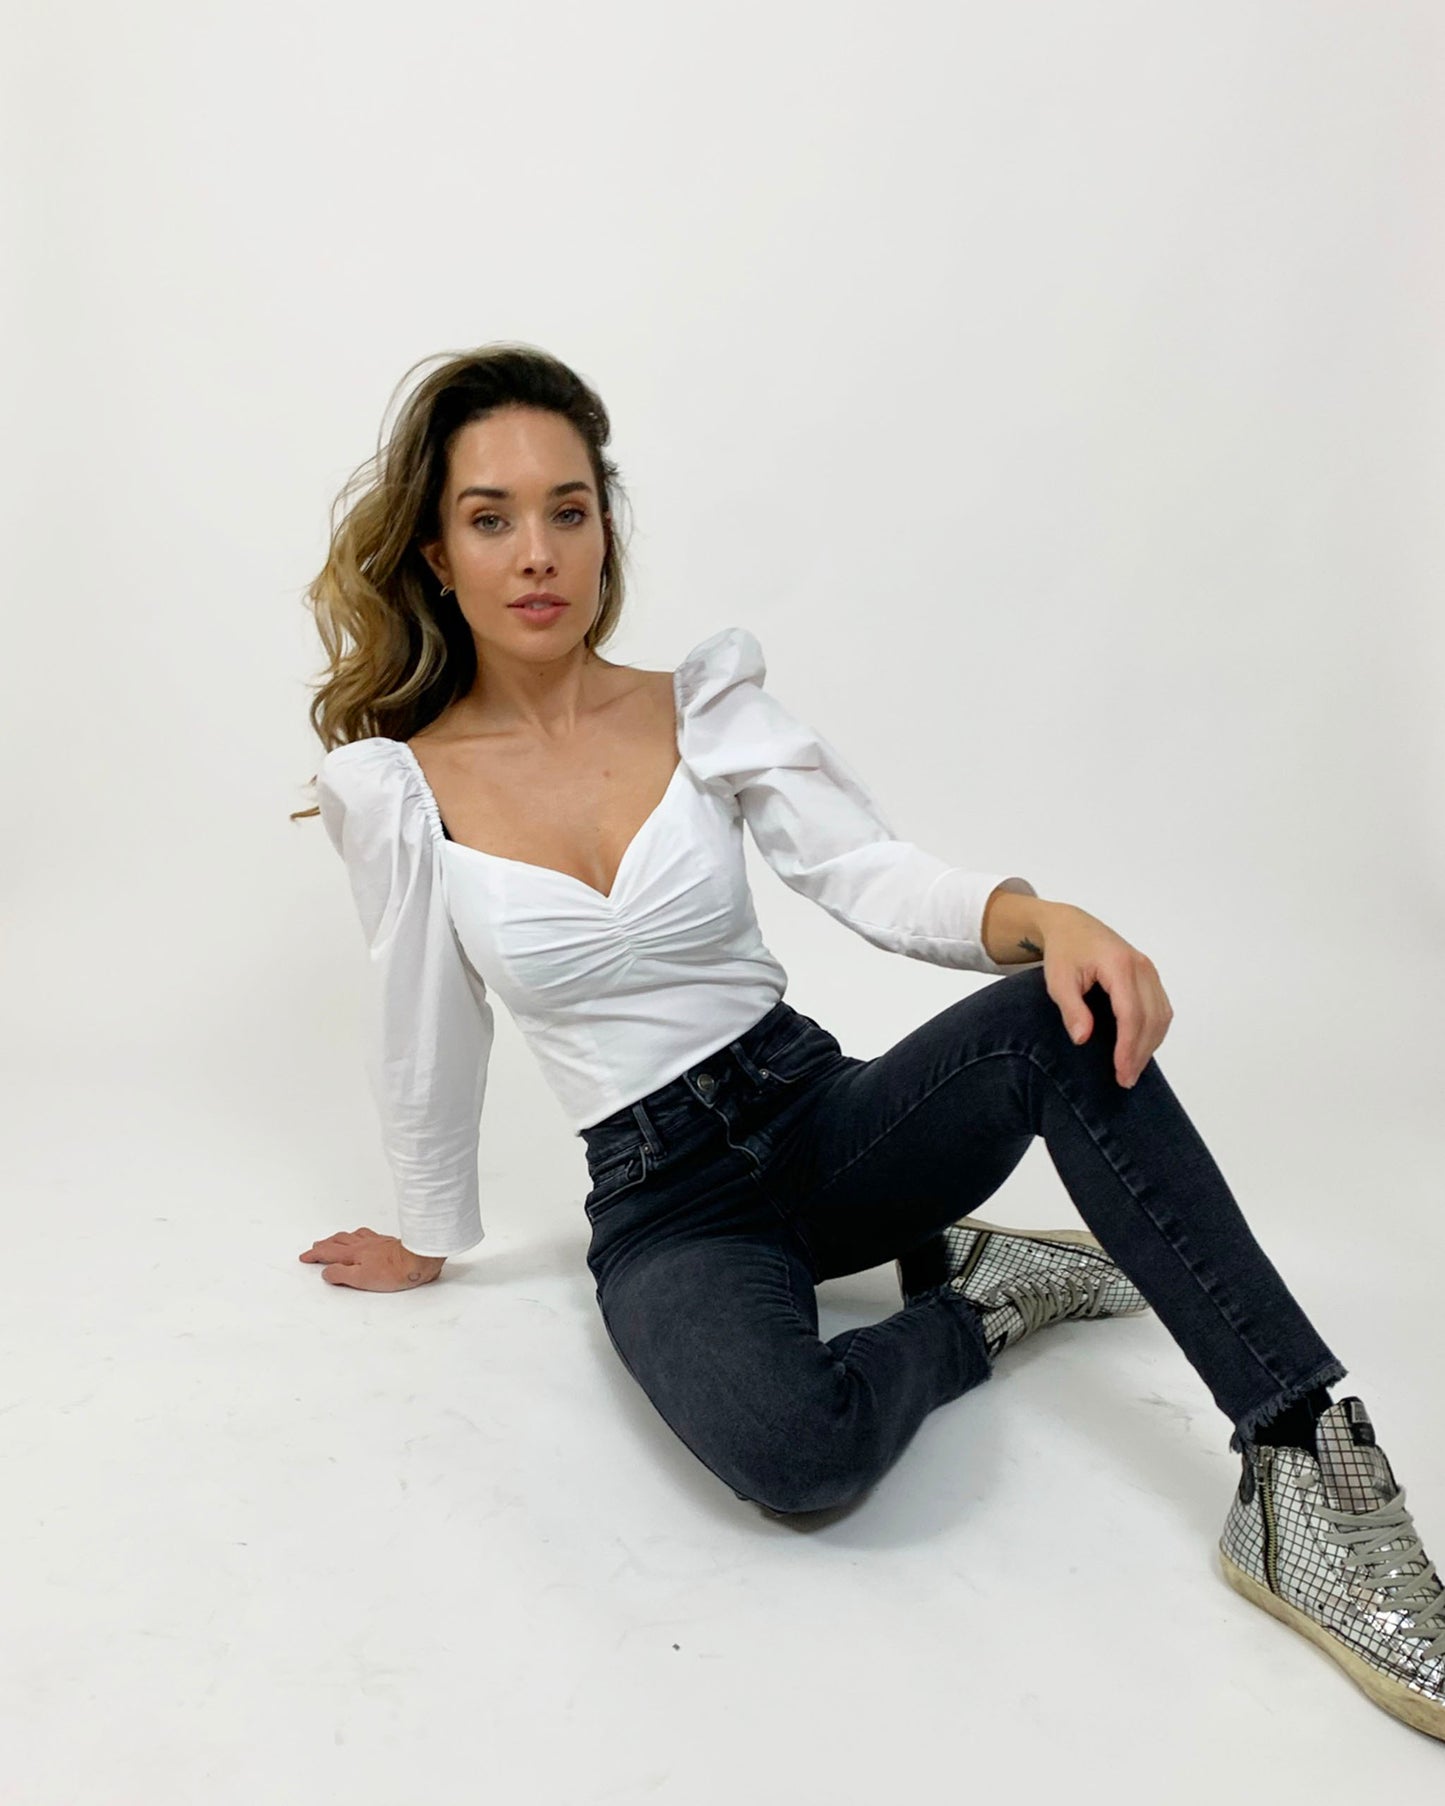 White cotton top with sweetheart neckline on brunette model sitting on floor in dark jeans and silver golden goose sneakers